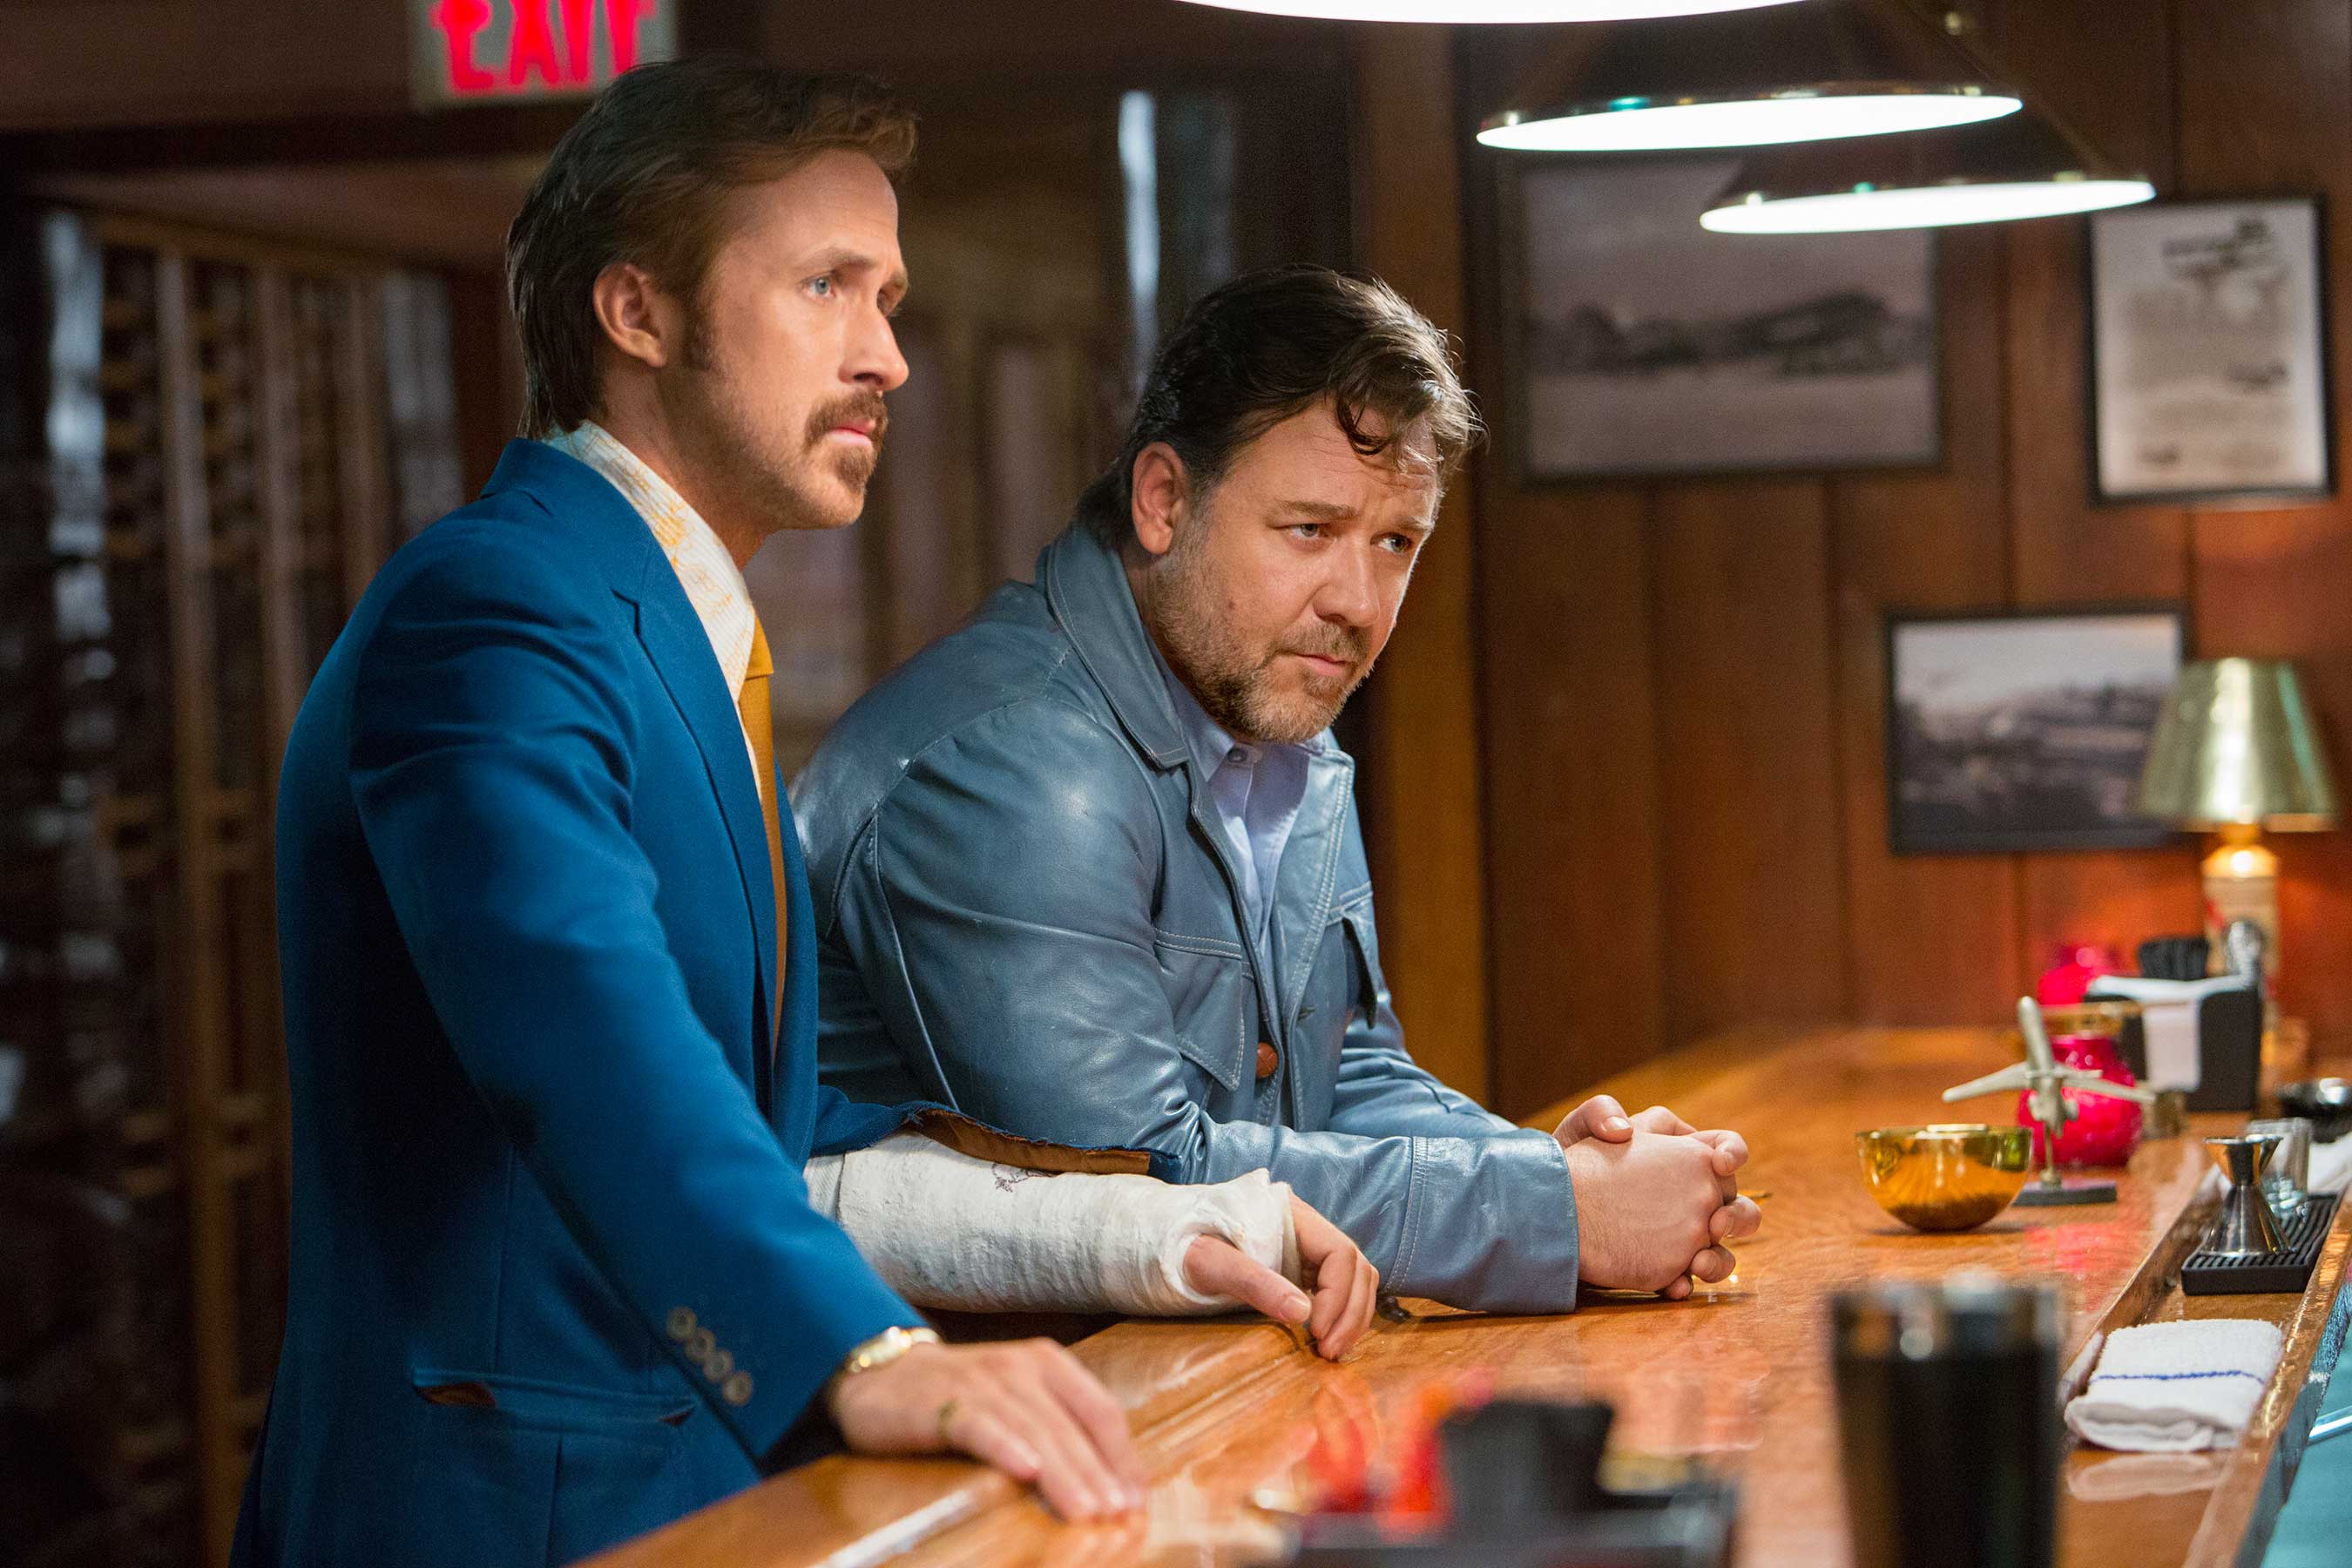 The Nice Guys Cast - Every Featured Performer and Character in the 2016 Movie